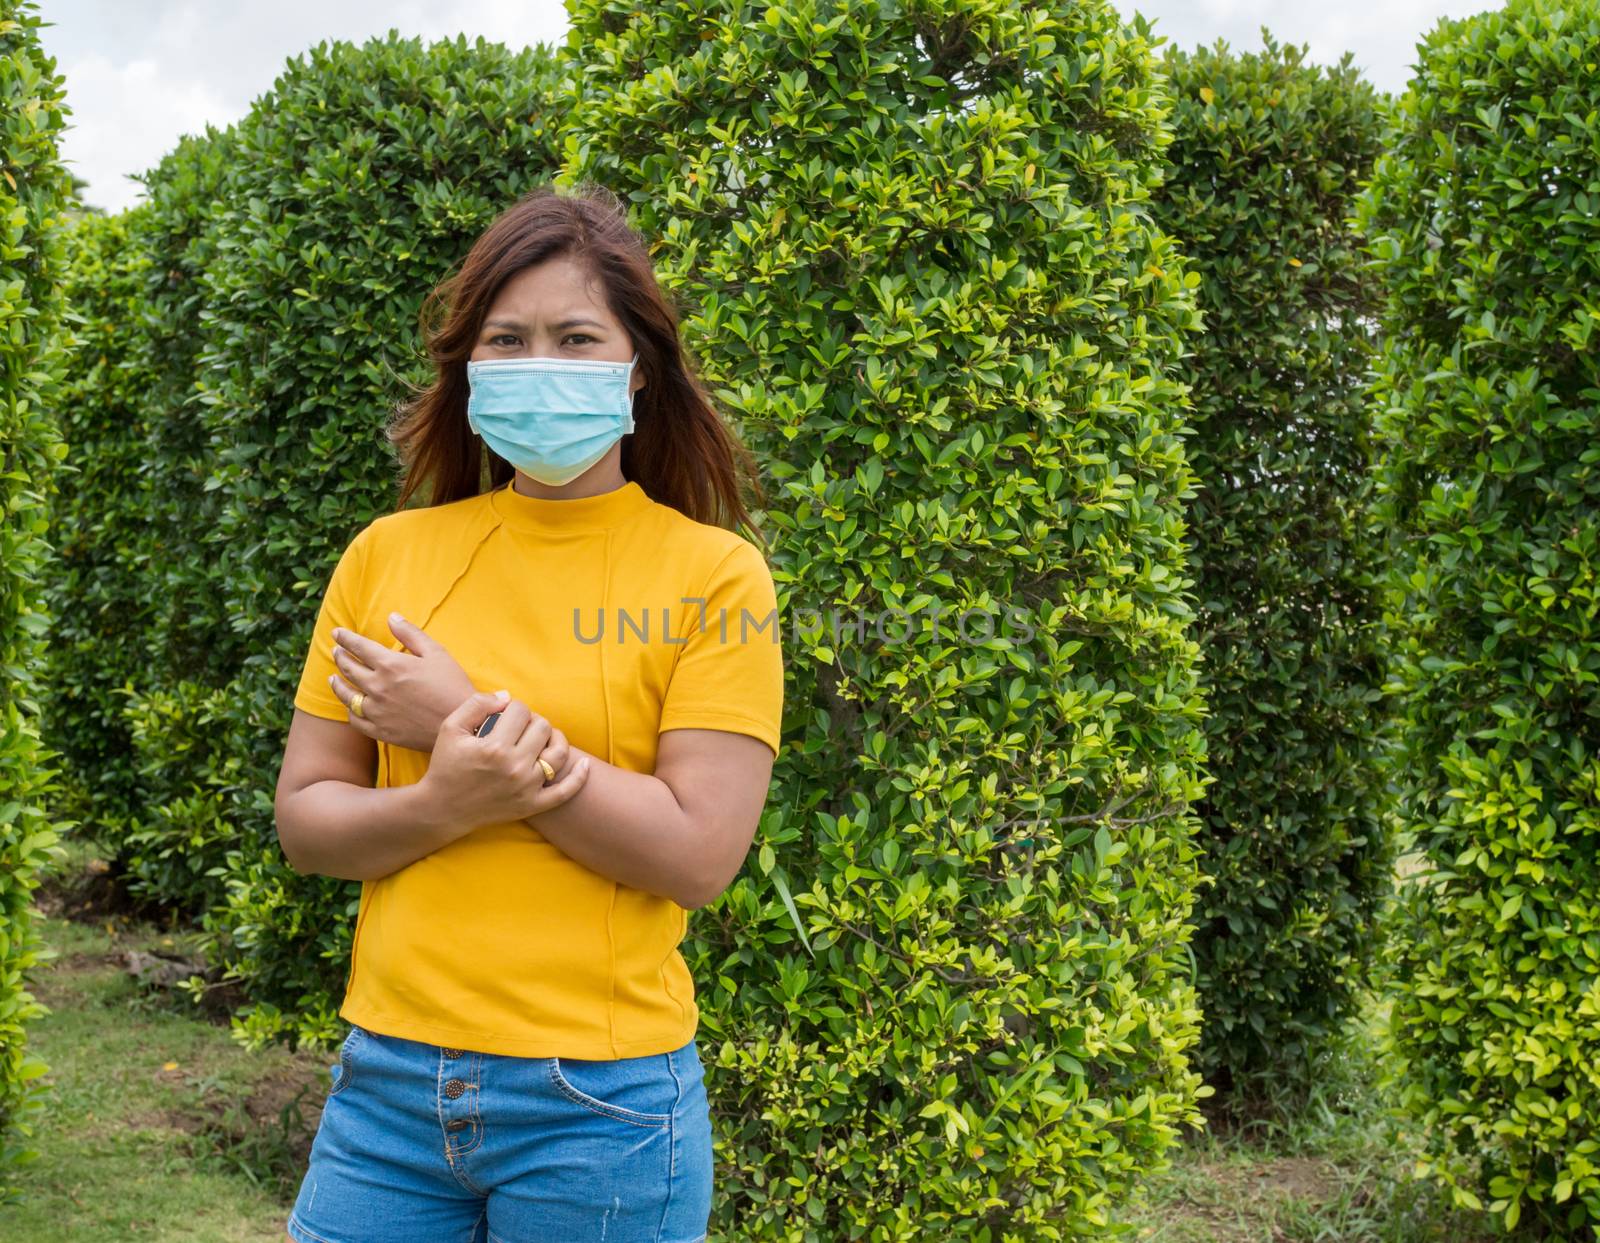 Portraits of women wearing protective masks During travel With a by Unimages2527